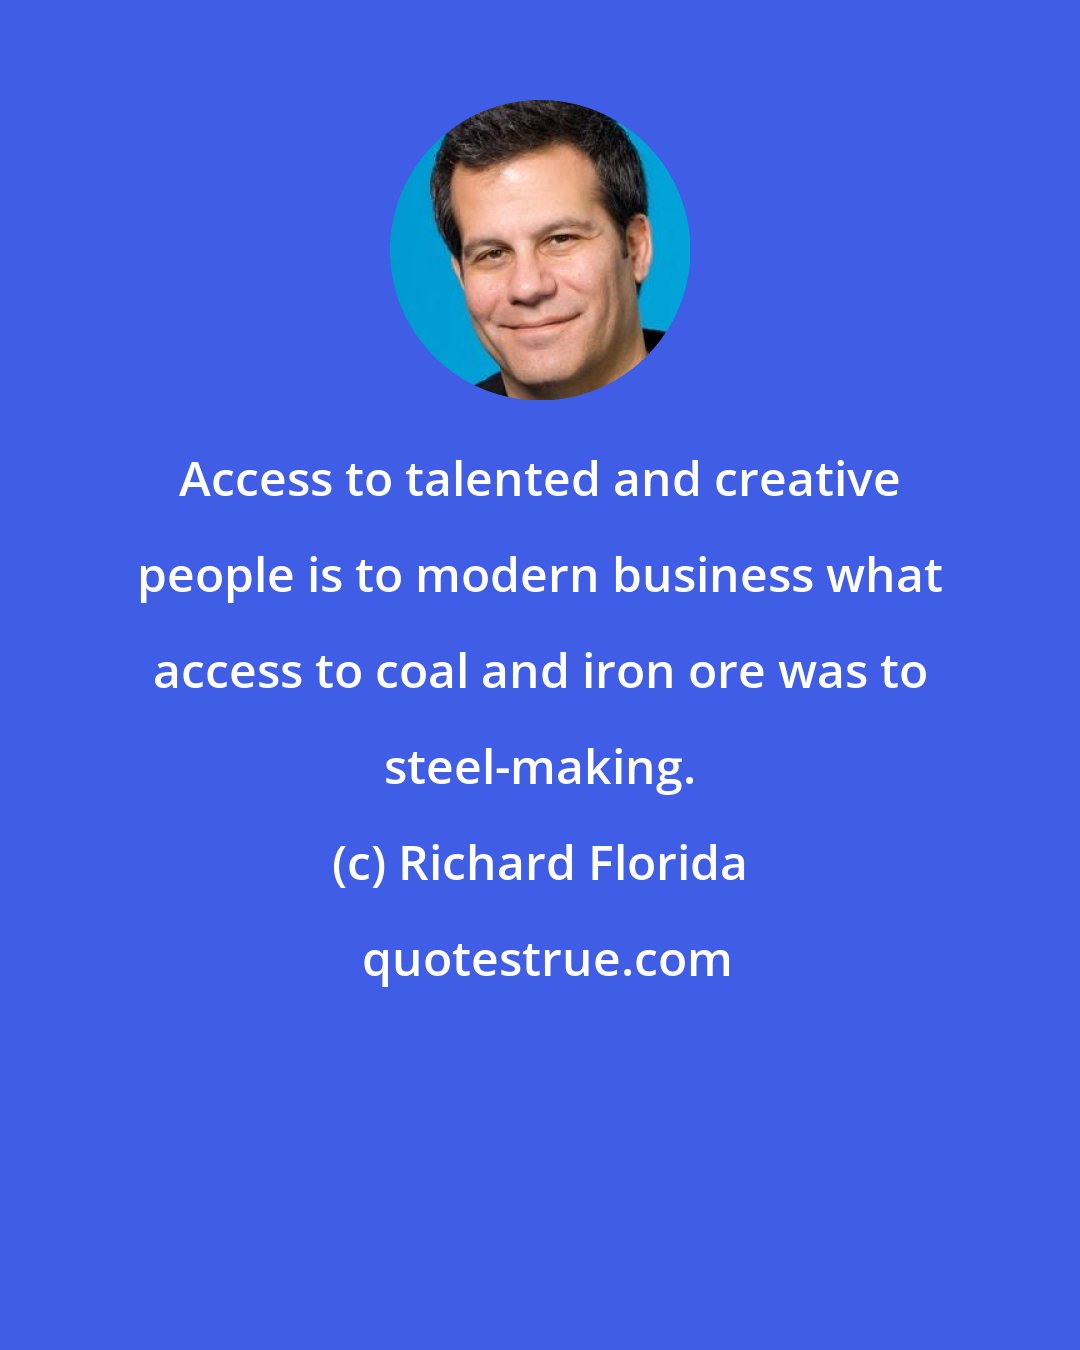 Richard Florida: Access to talented and creative people is to modern business what access to coal and iron ore was to steel-making.